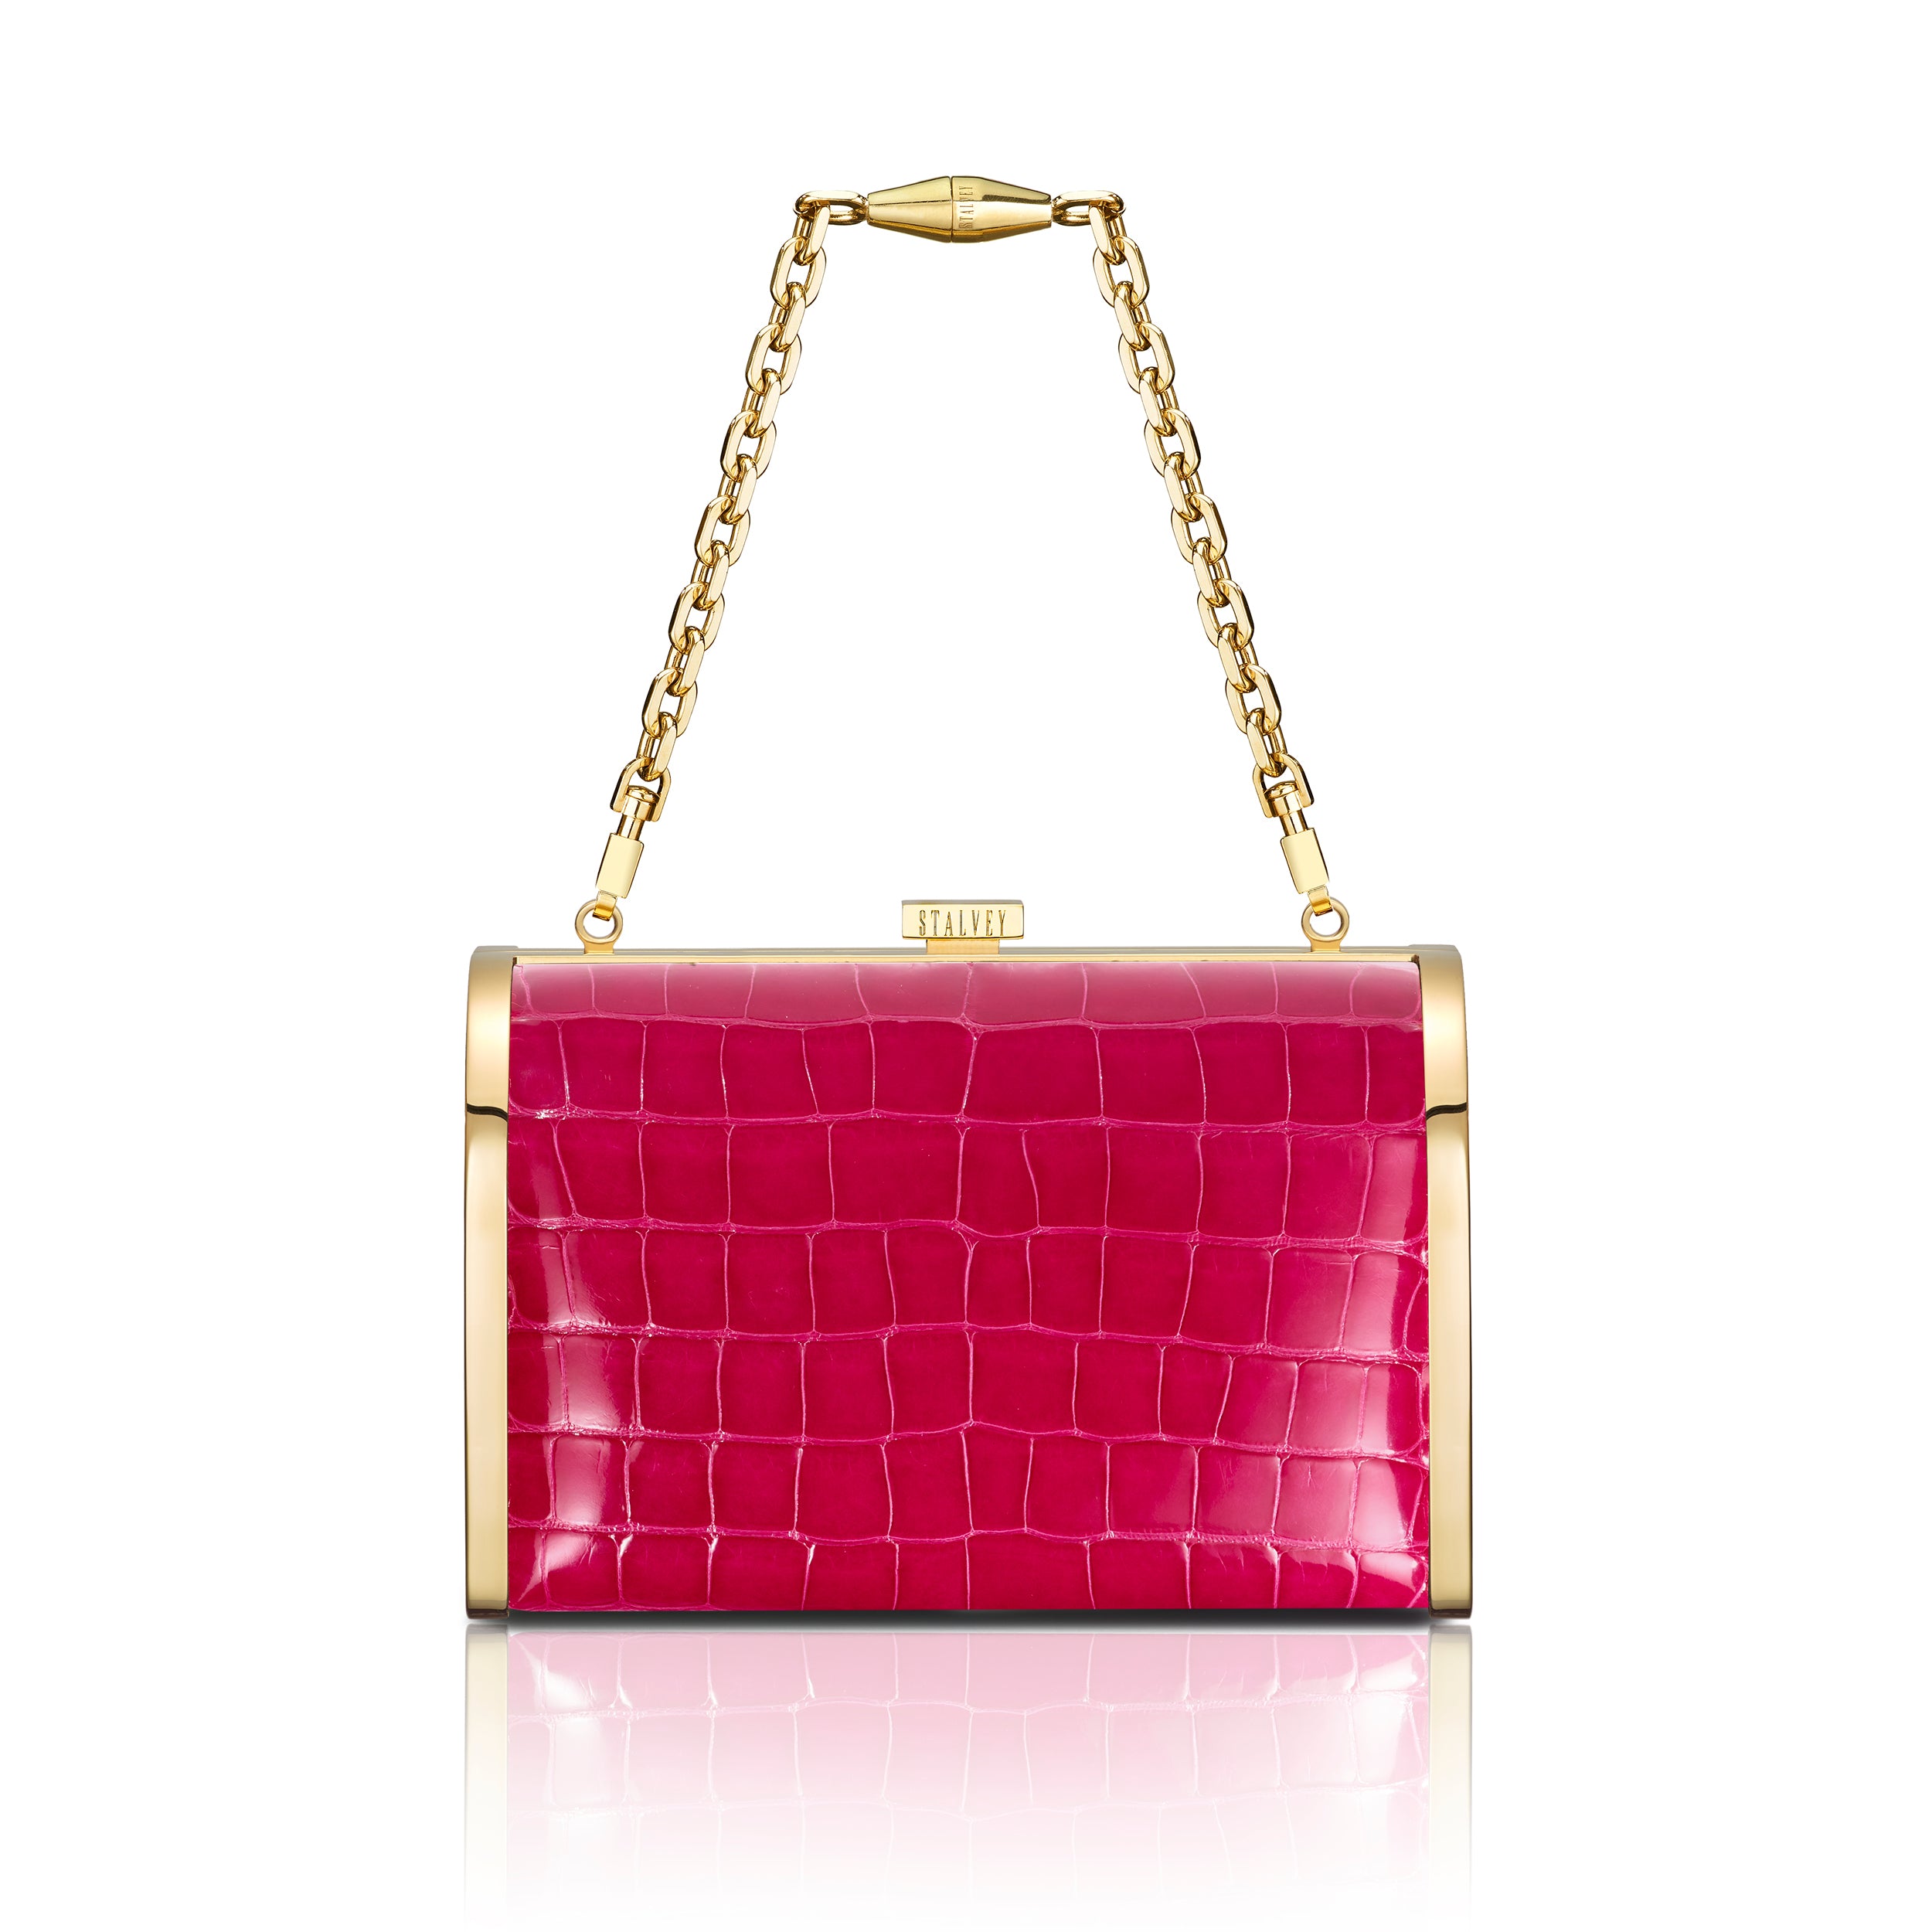 STALVEY Rounded Clutch in Hot Pink Alligator with 24kt Gold Hardware Front View with Chain